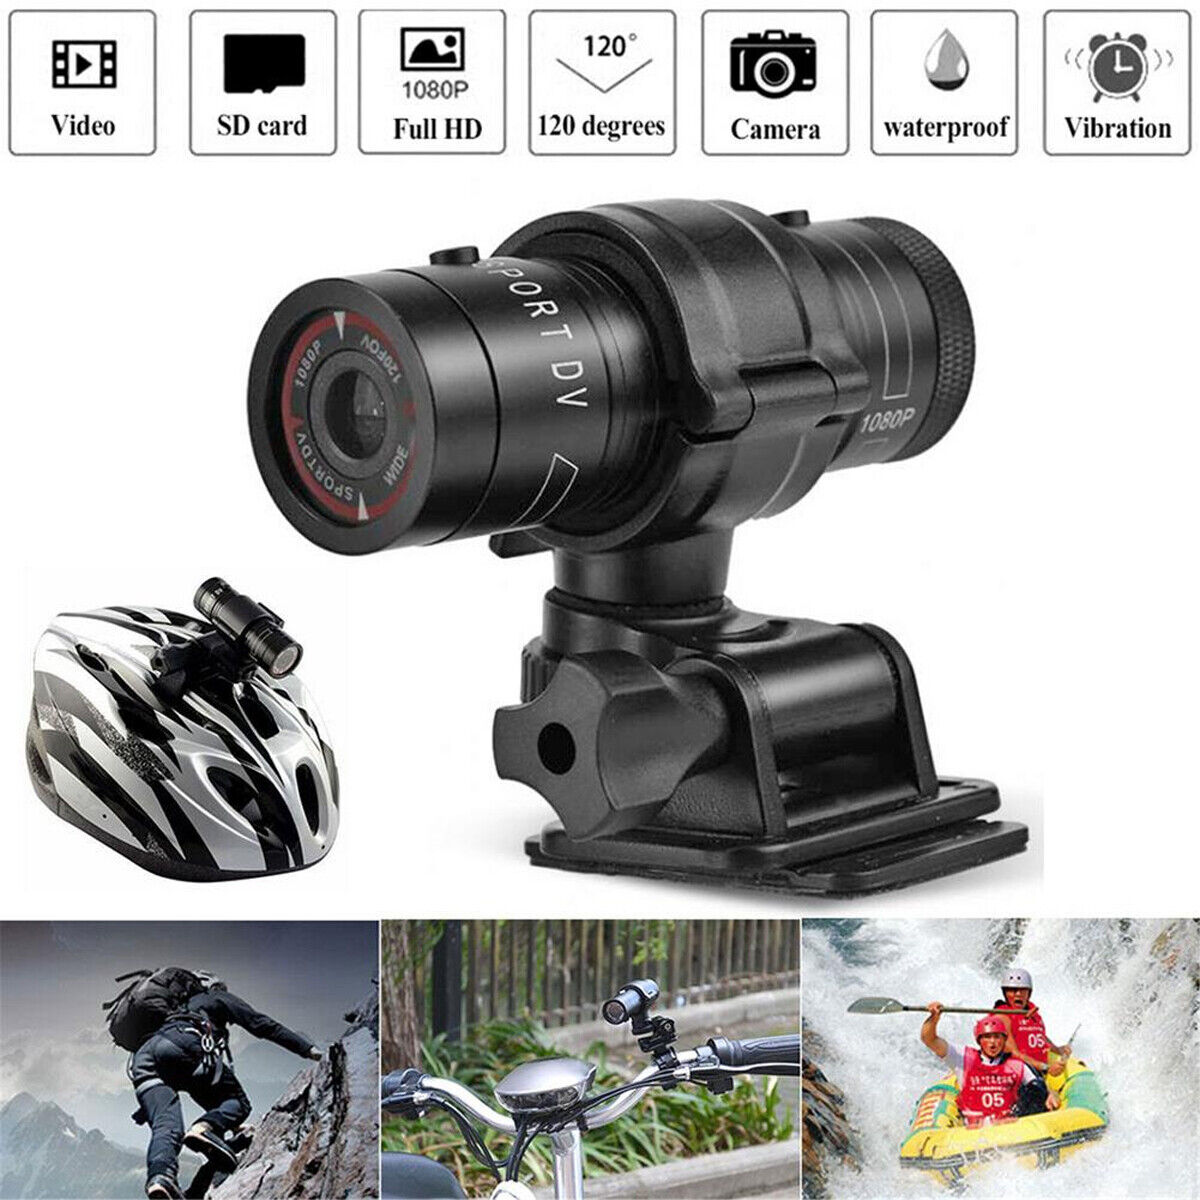 Capture Adventure: Full HD Video Recording with Waterproof, Vibration-Resistant Dash Cam Action. 120° Wide Angle, Camera, and SD Card Included.